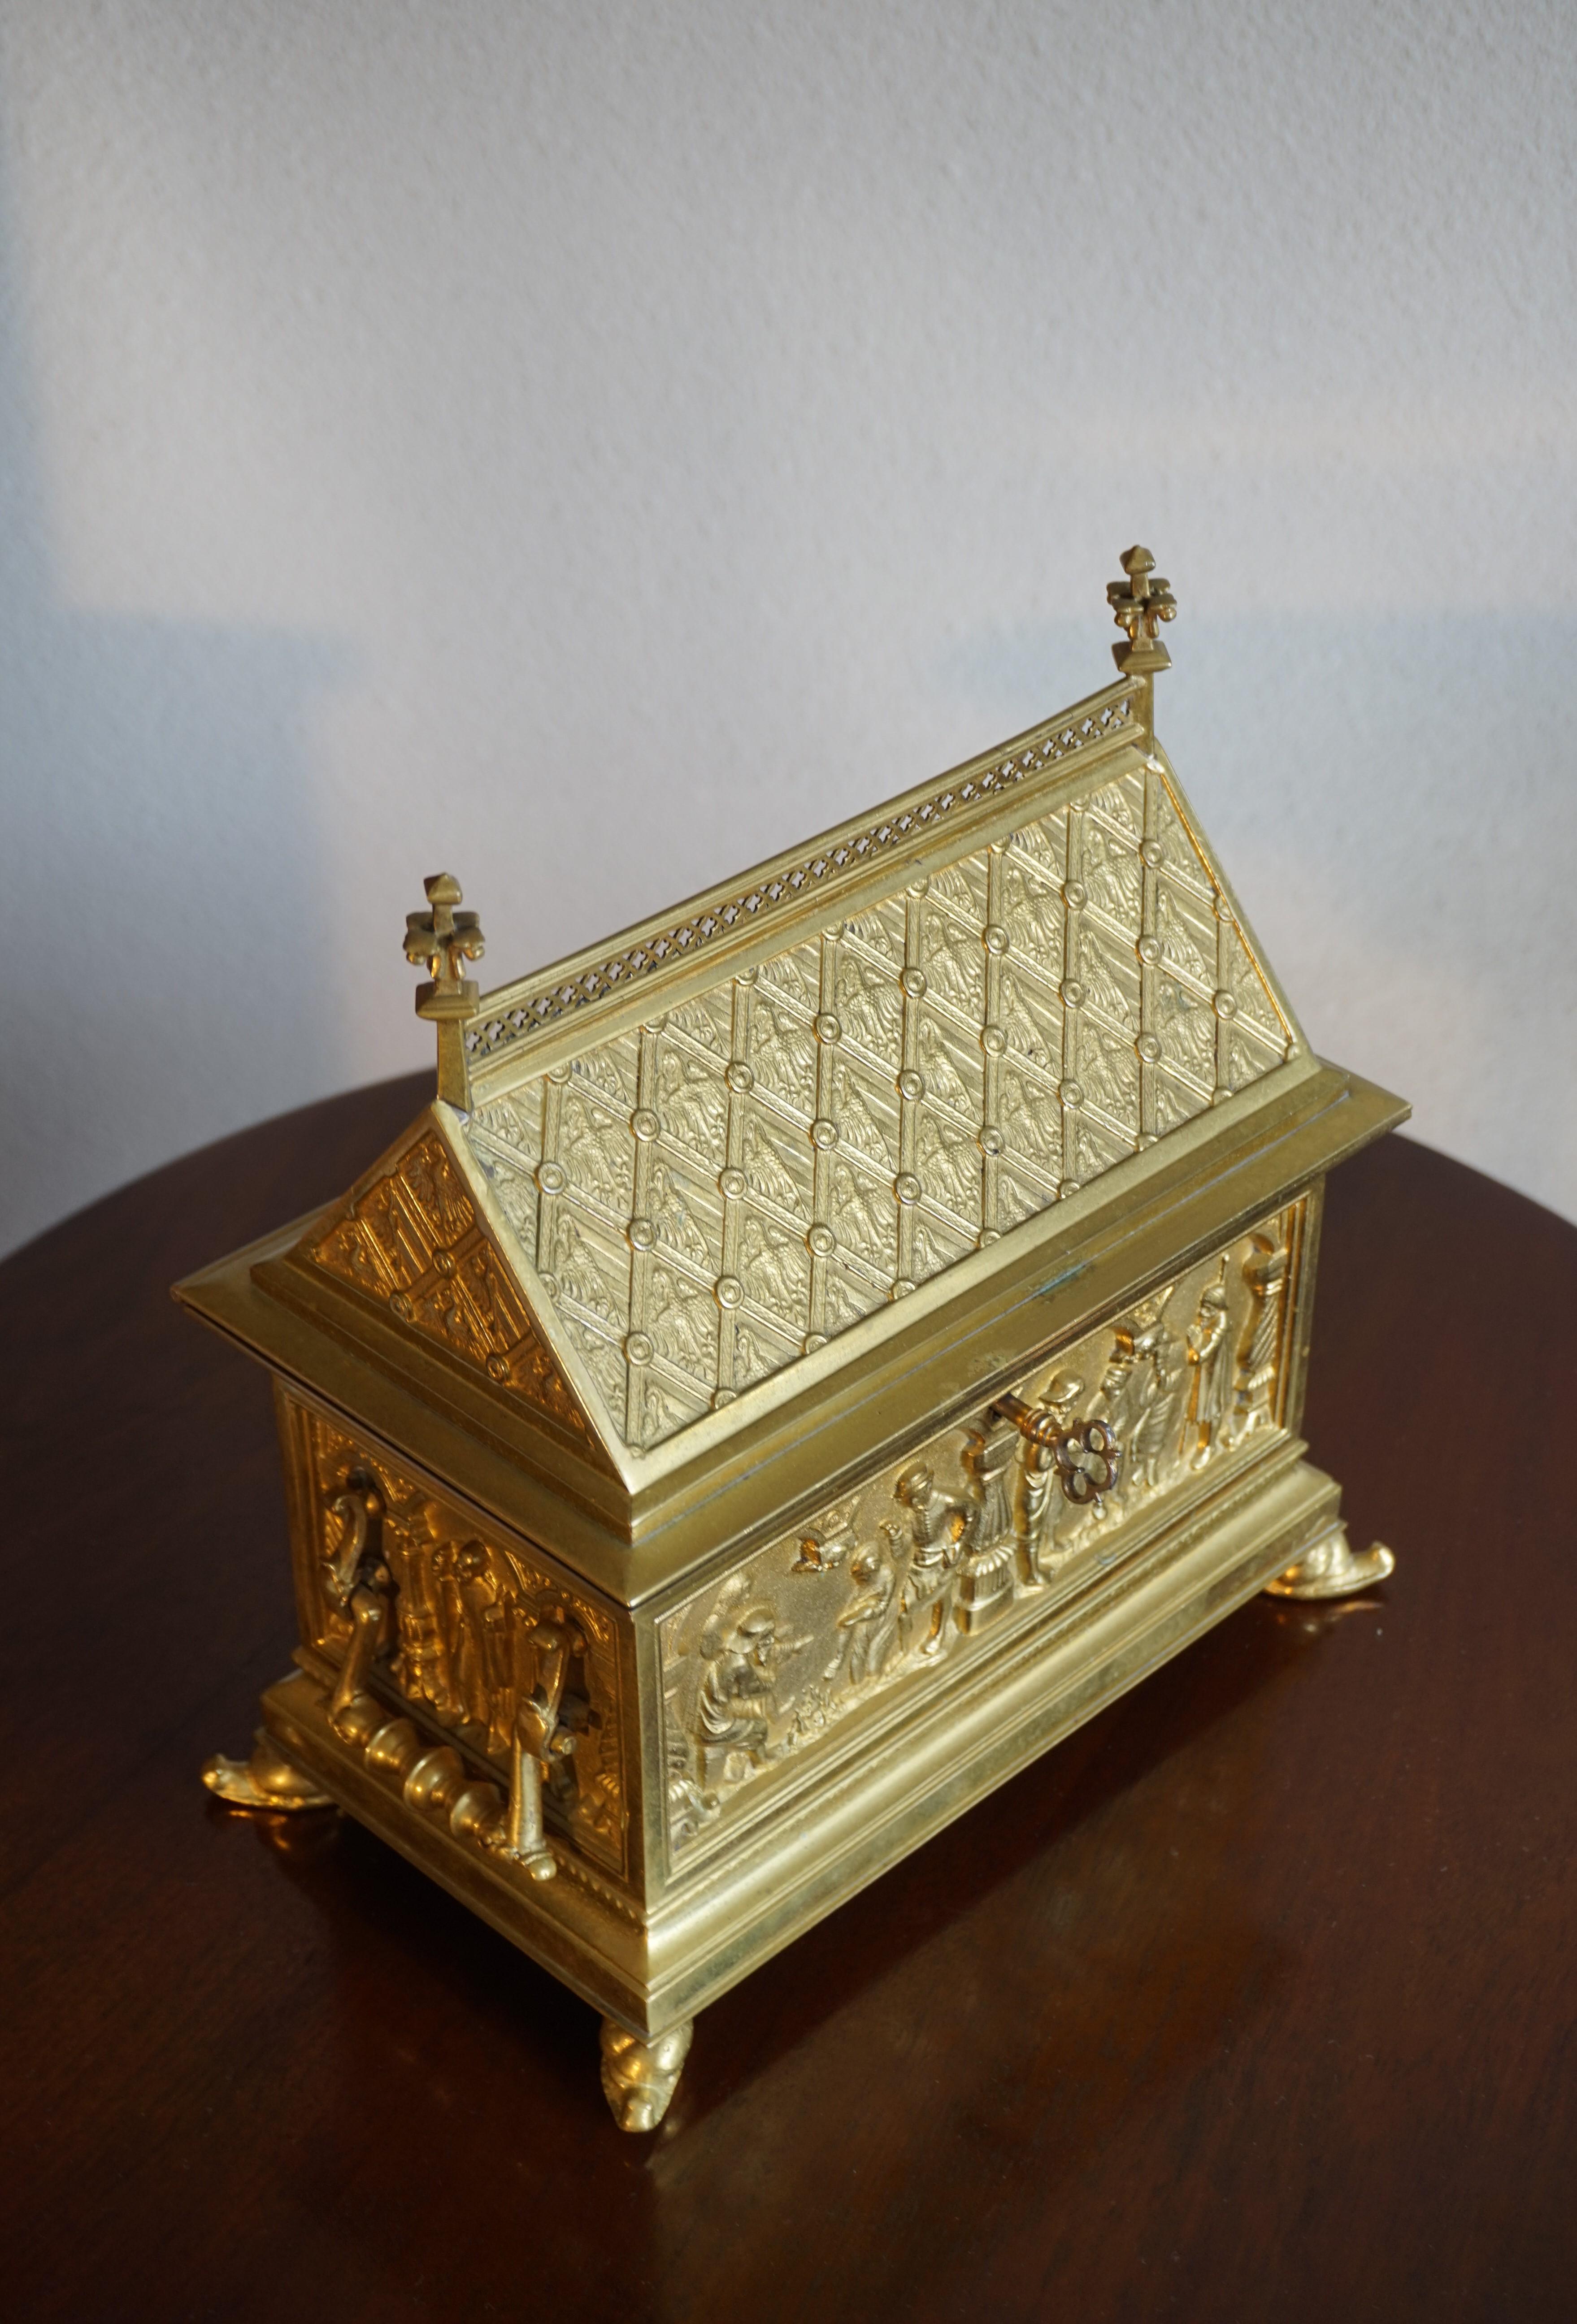 Antique & Stylish Gothic Revival Gilt Bronze & Brass Church Relic or Jewelry Box 9